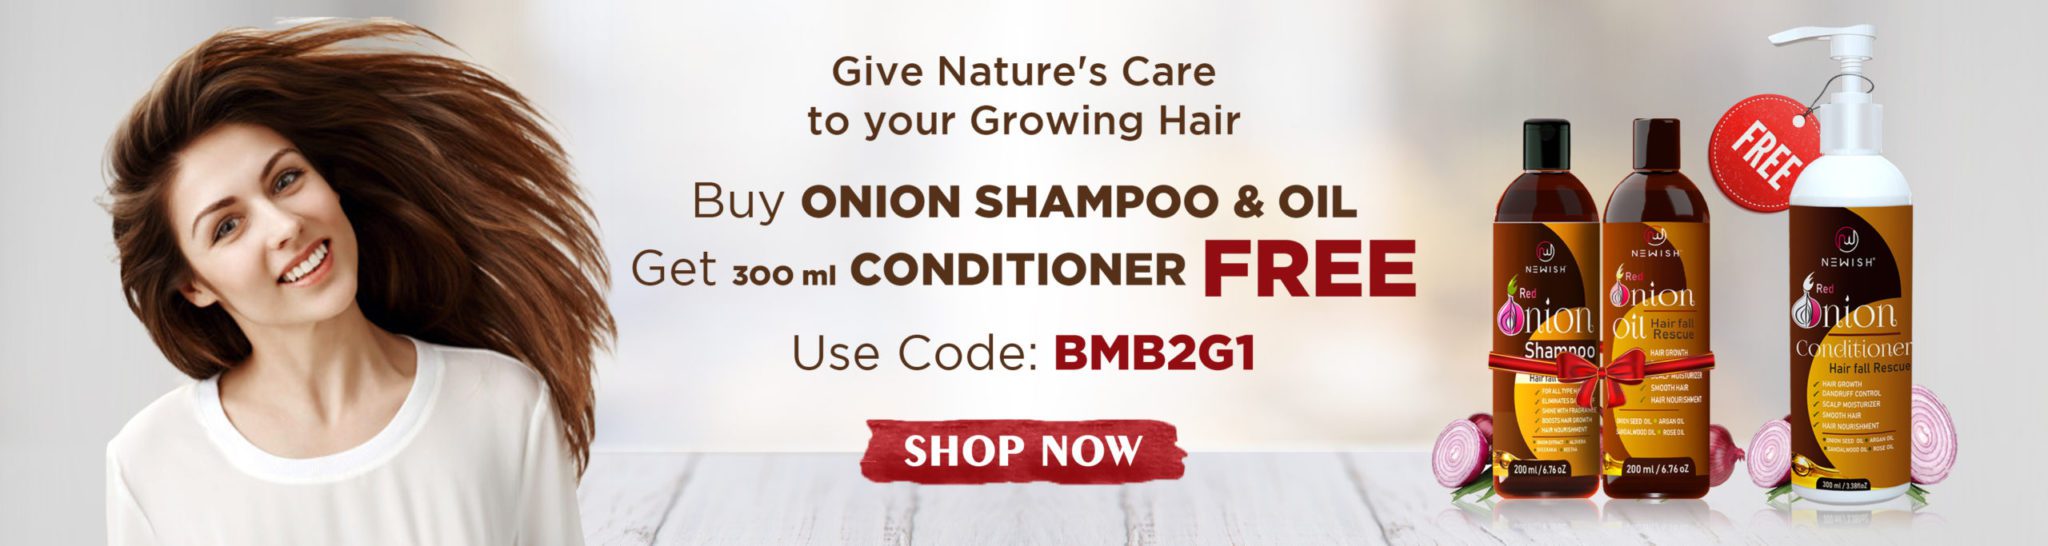 Ayurvedic products for hair | Natural hair care products | Newish